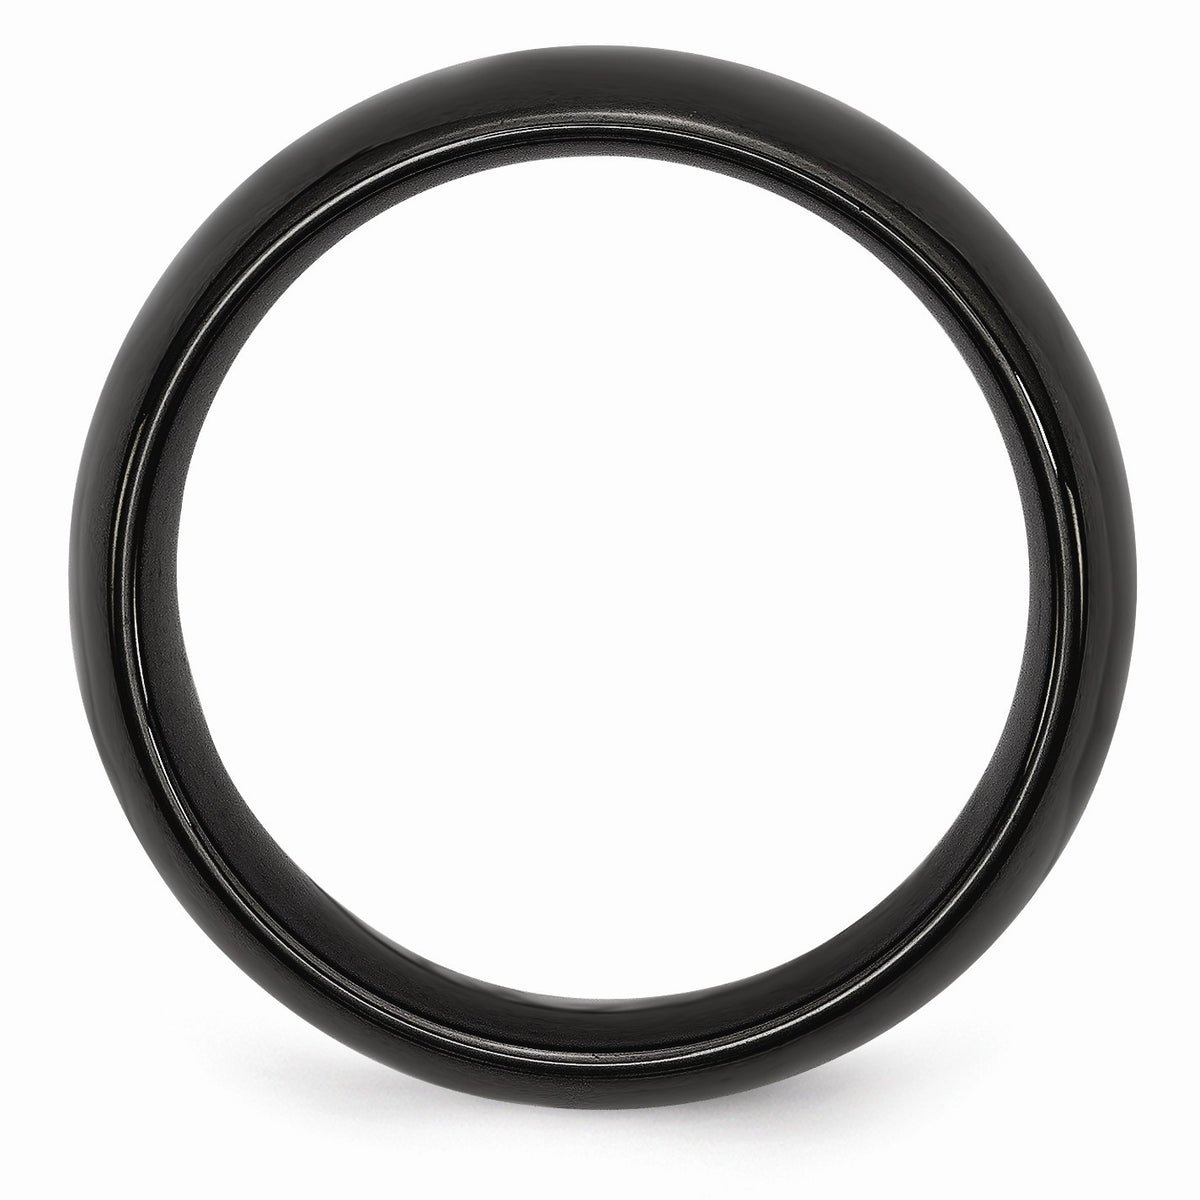 Alternate view of the Black Ceramic, 8mm Polished Domed Comfort Fit Band by The Black Bow Jewelry Co.